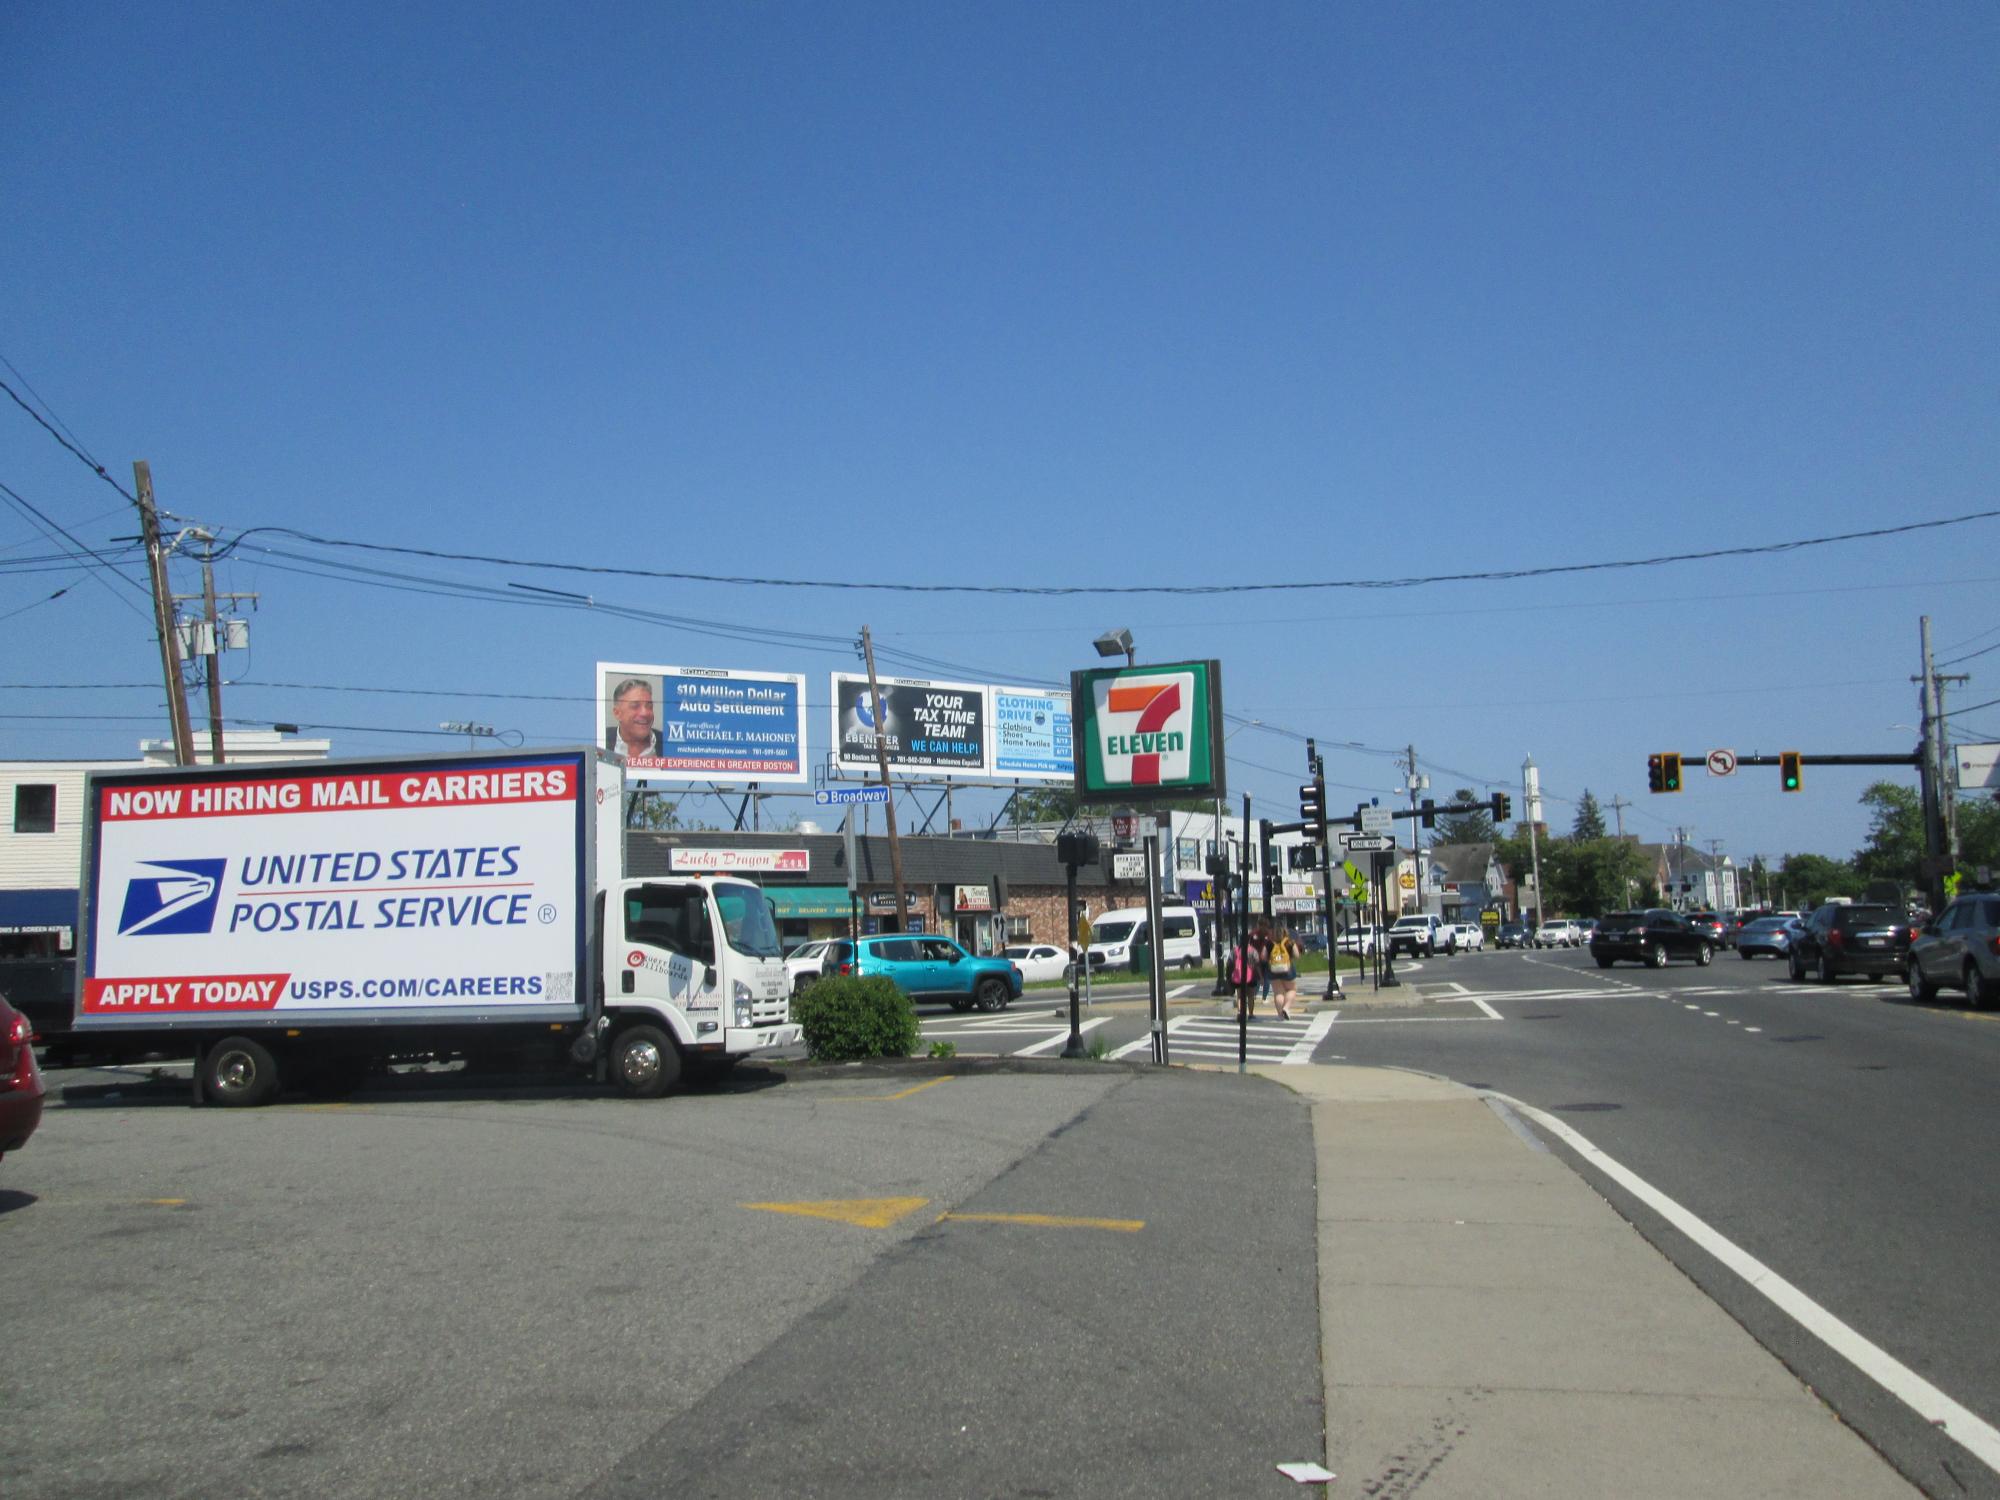 Mobile billboard truck stopped at Wyoma Square in Lynn MA.